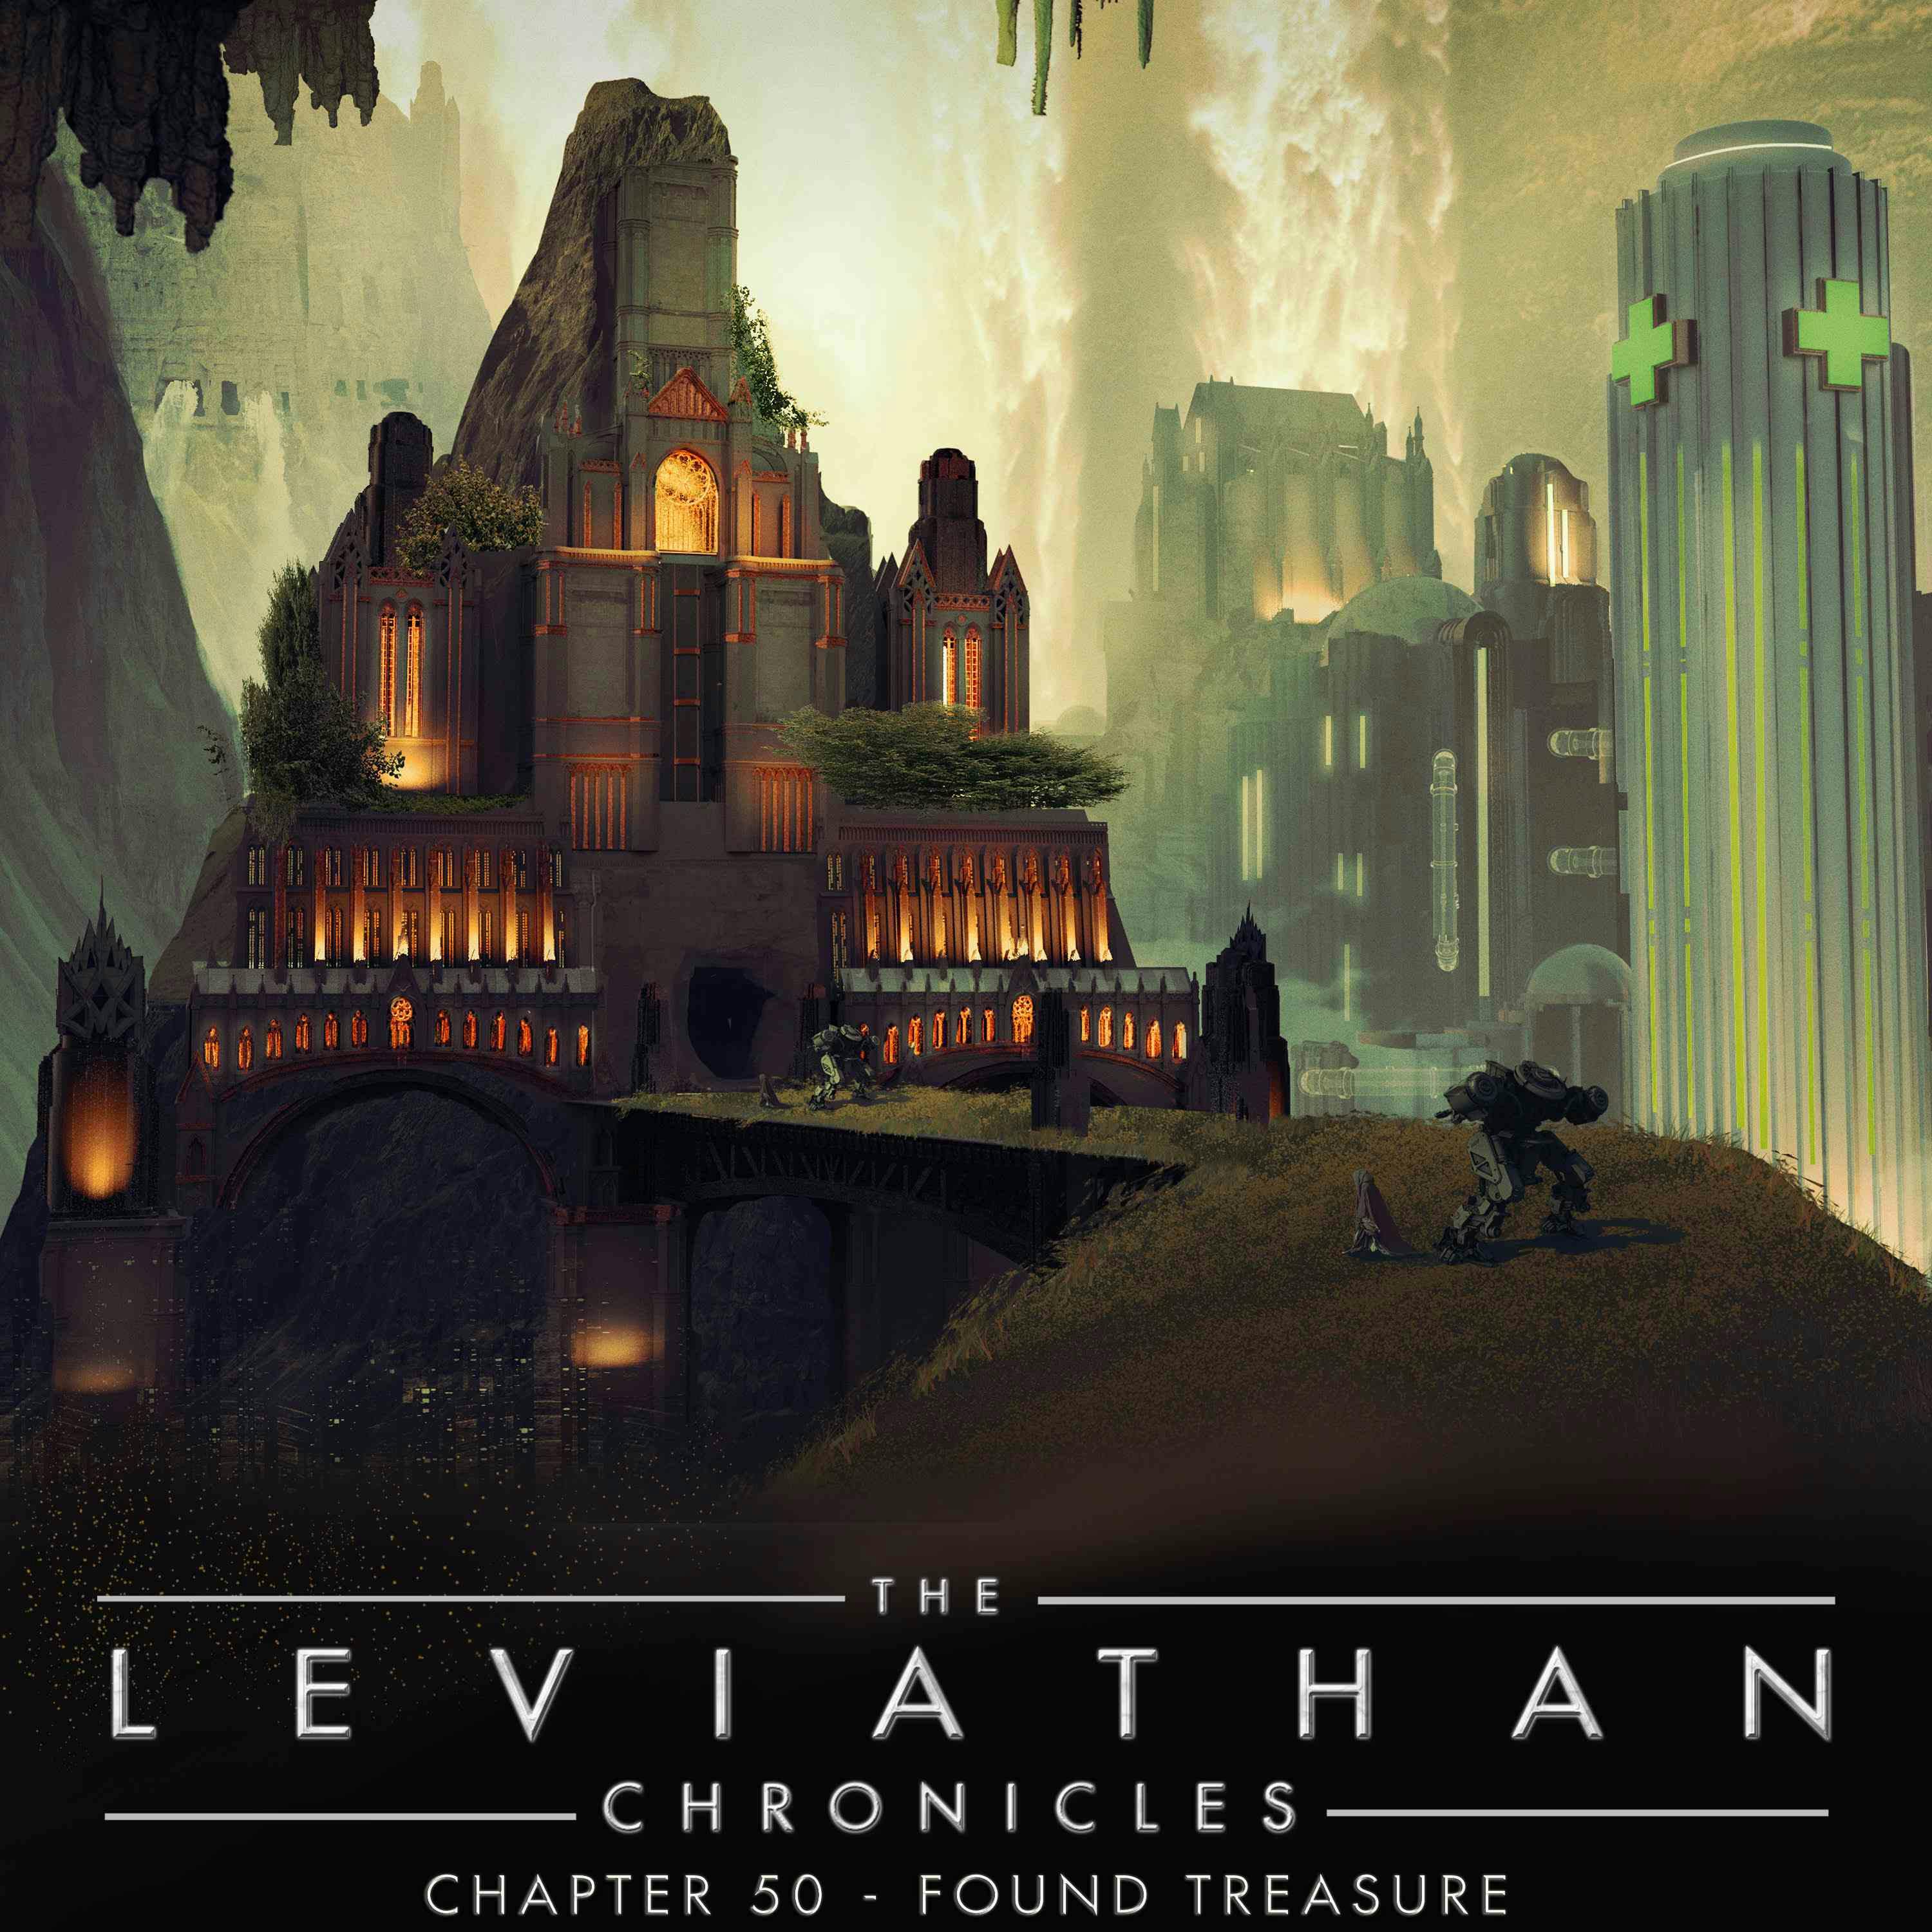 The Leviathan Chronicles | Chapter 50 - Found Treasure